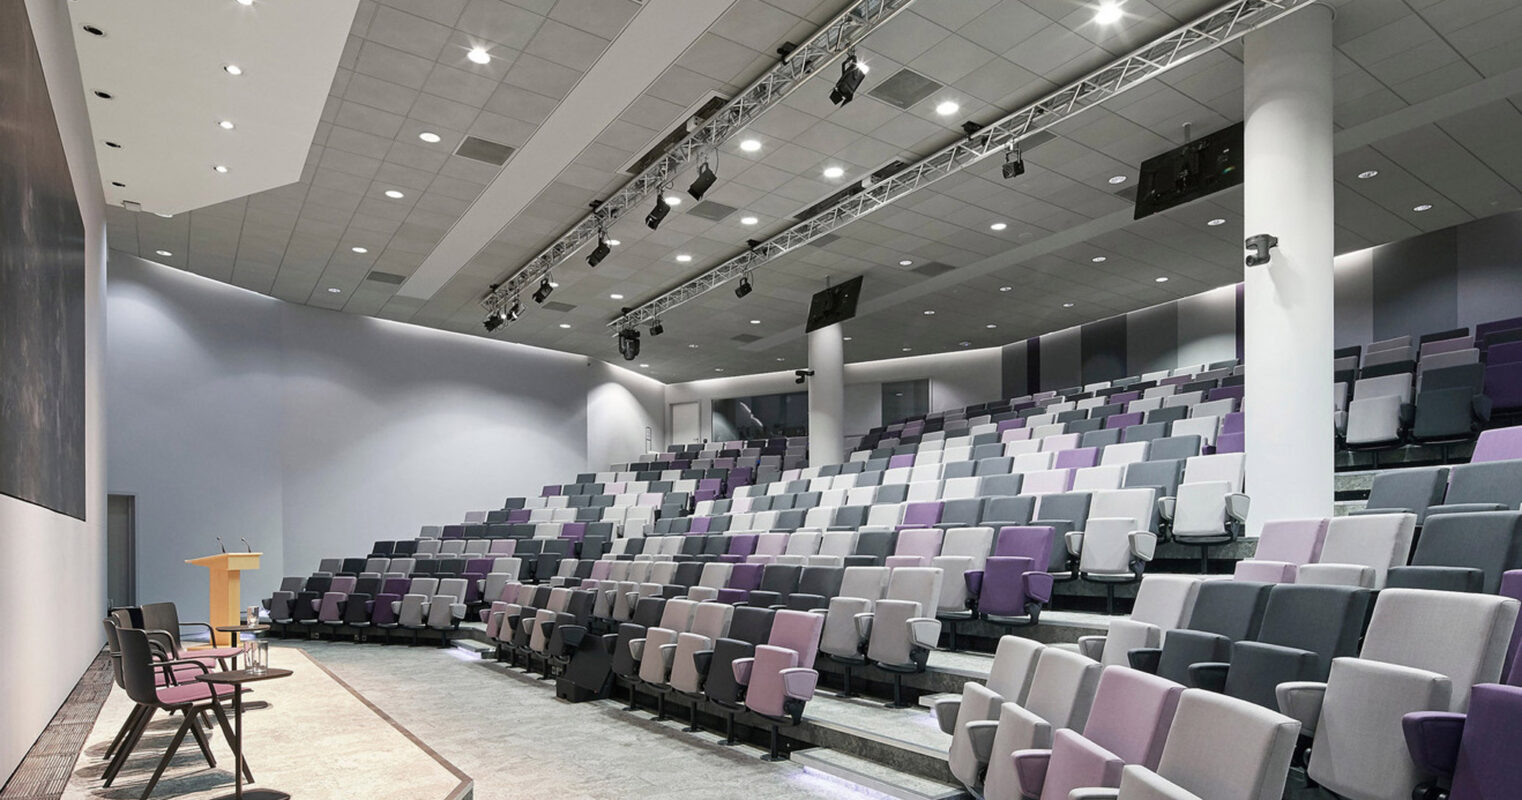 Contemporary auditorium with tiered seating featuring shades of gray and purple upholstered chairs, focused lighting from ceiling spots and ambient wall fixtures, and a central stage with a wooden podium flanked by chairs.